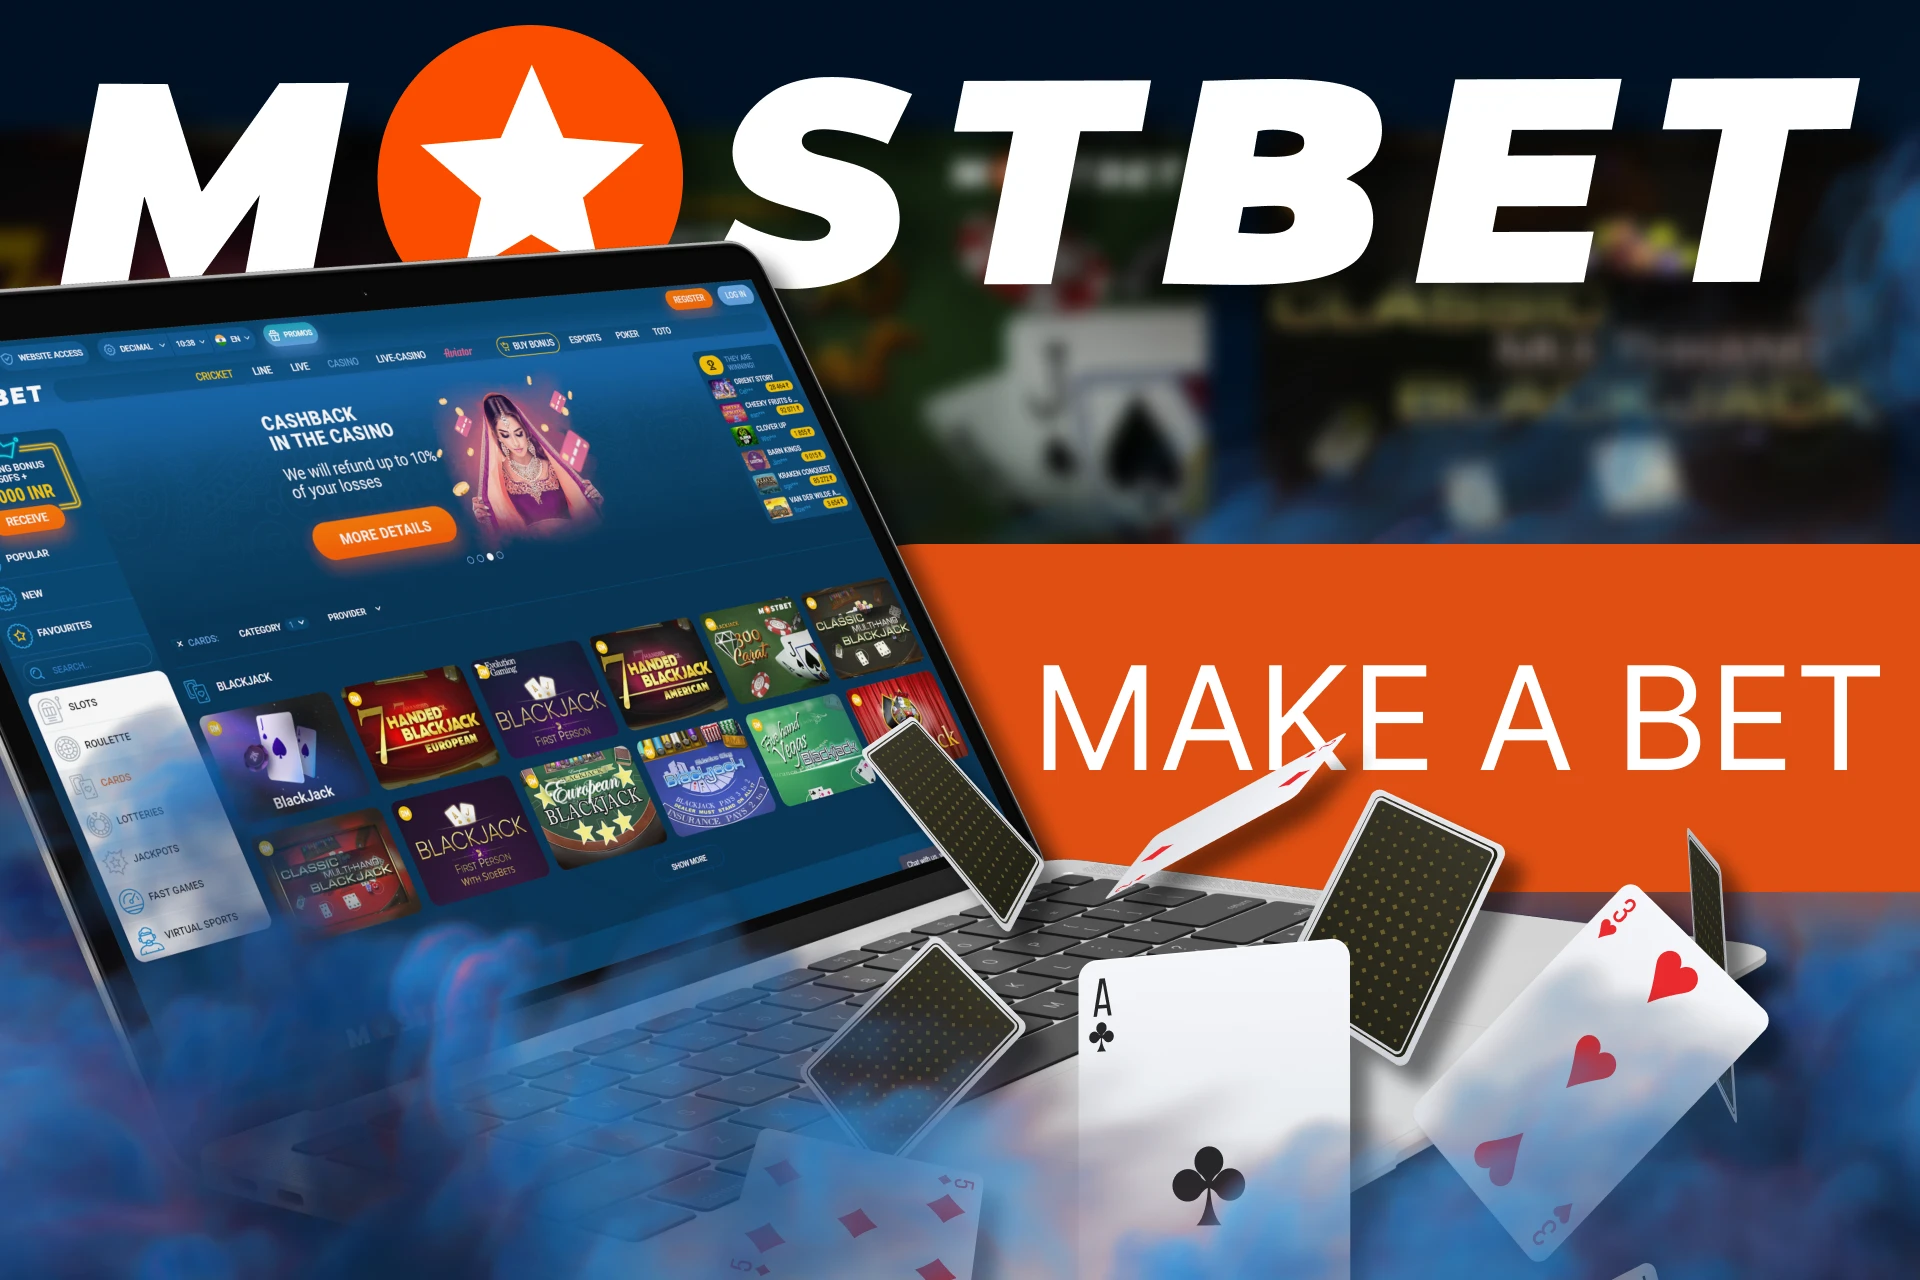 Start playing blackjack at Mostbet now with these simple instructions.